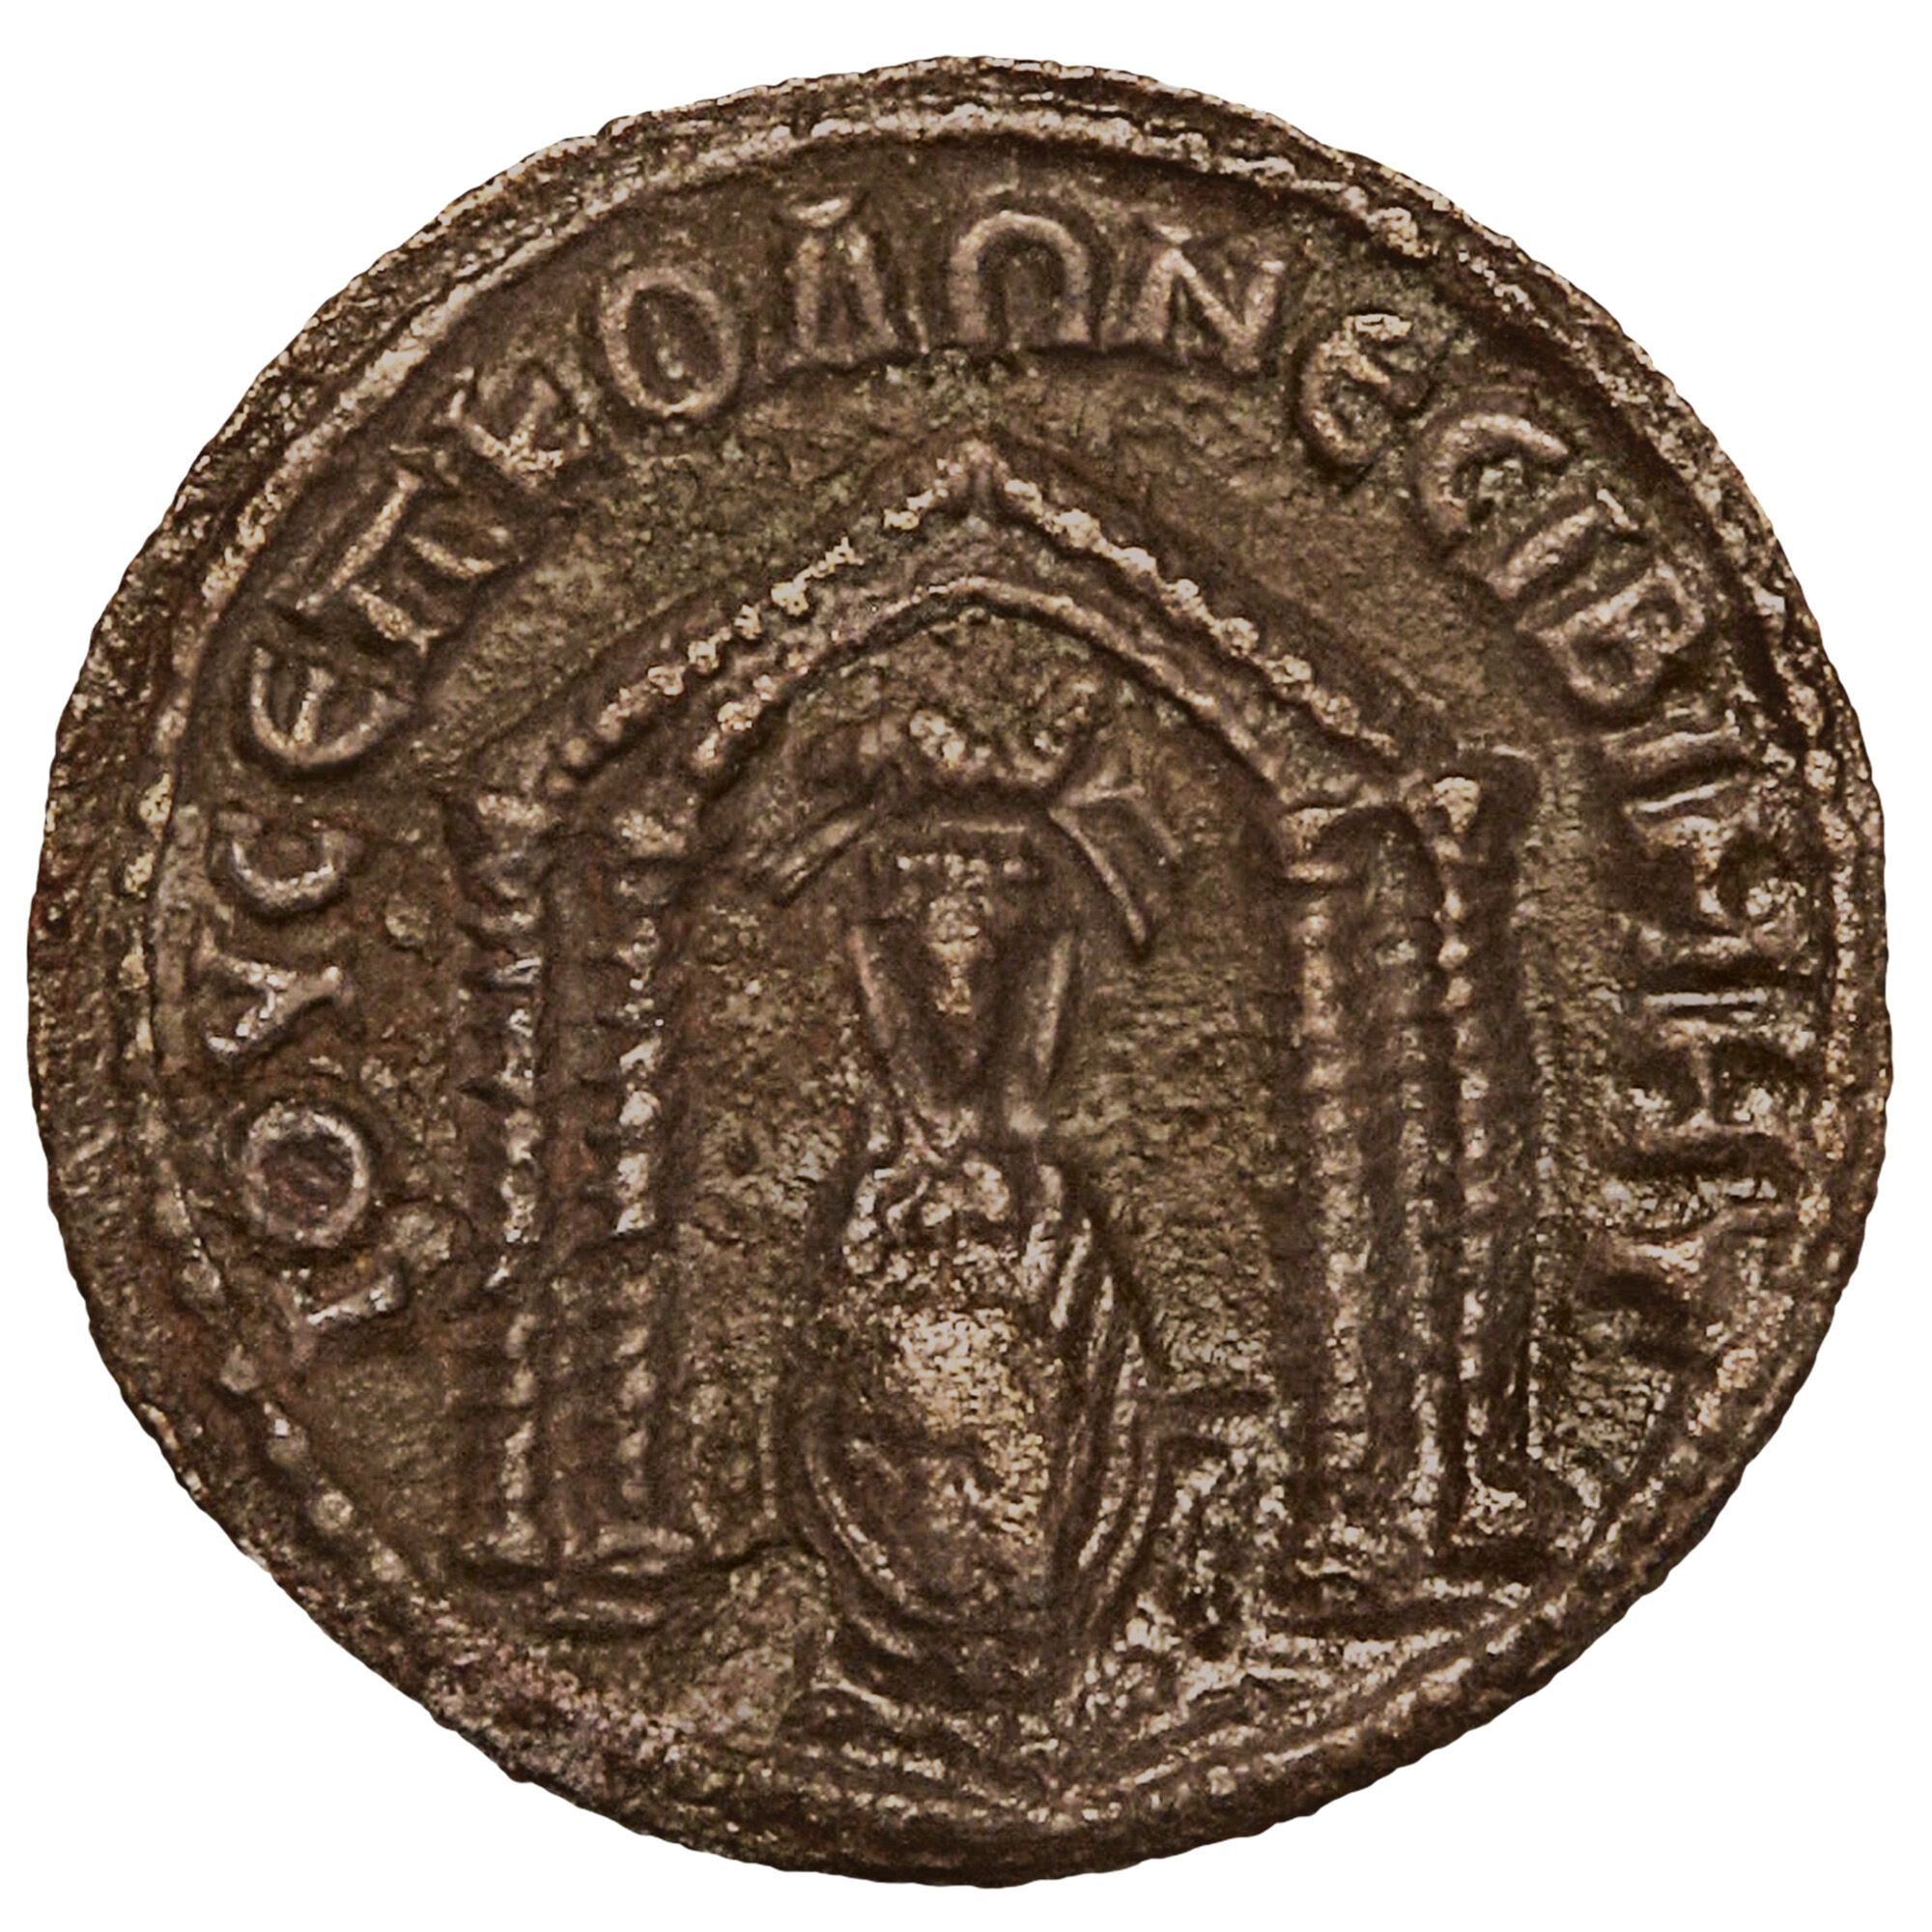 Magnifying ancient coins